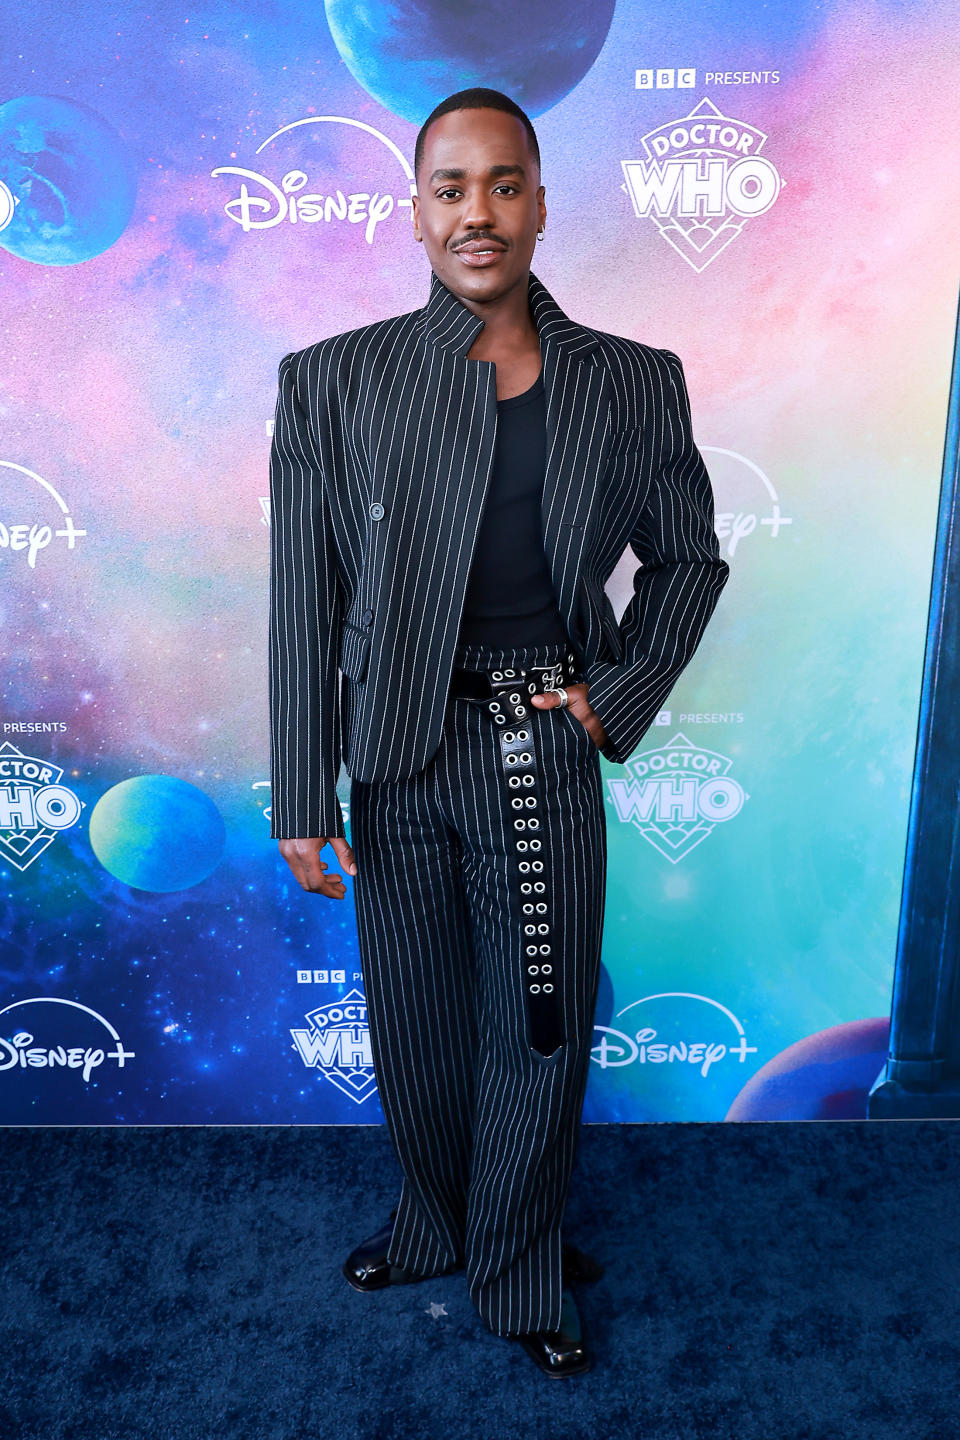 Ncuti Gatwa at the U.S. premiere of the new season of the Disney+ series ‘Doctor Who.’